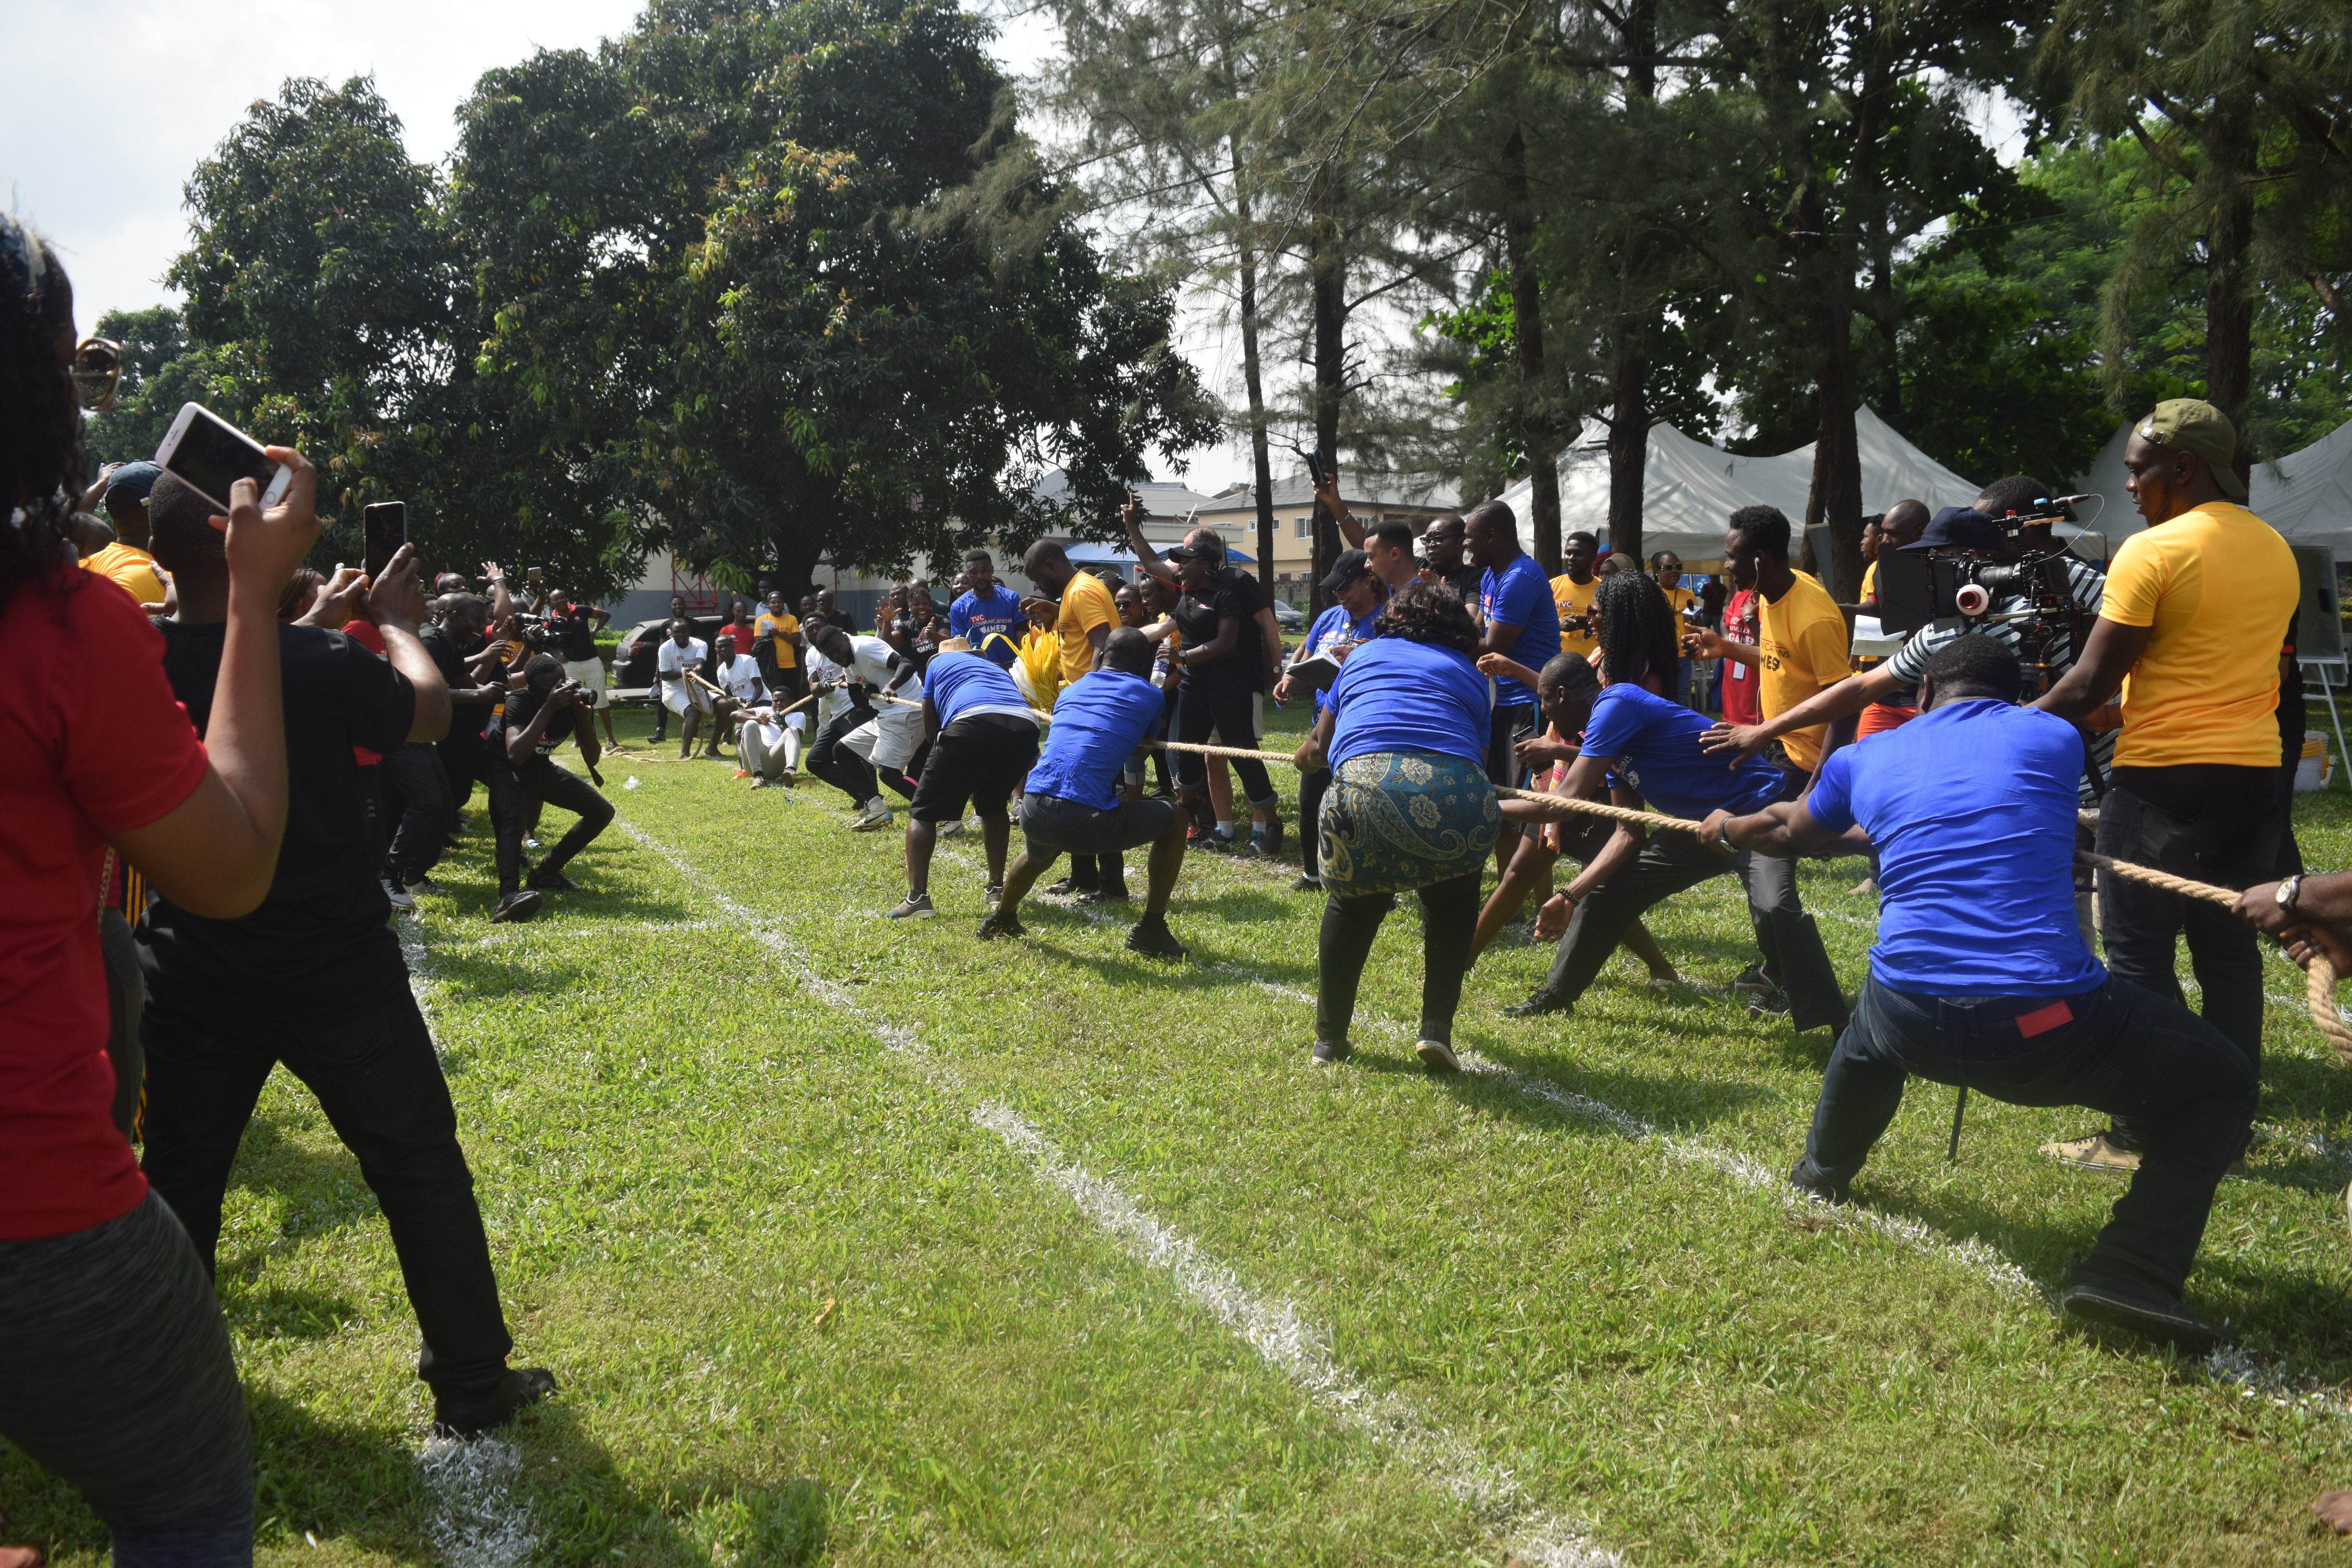 TVC Communications holds maiden Games for all its employees